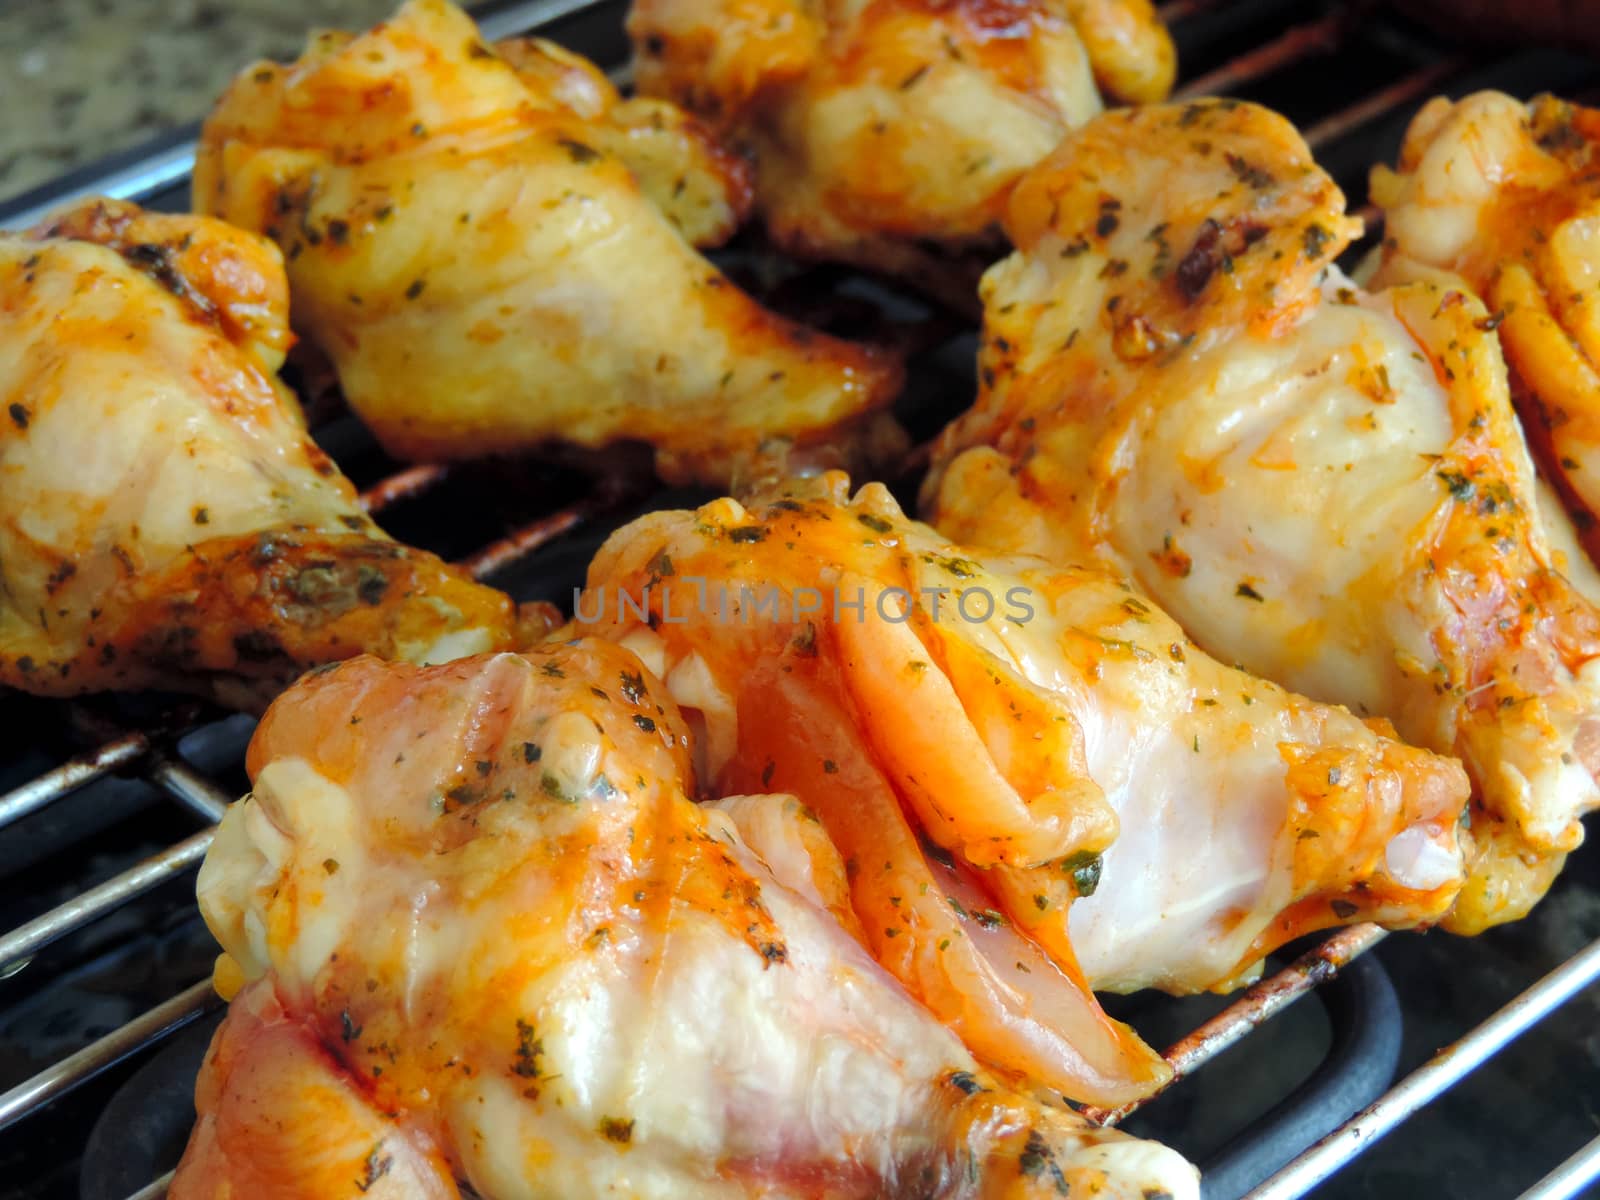 Some Grilled chicken Legs on the grill